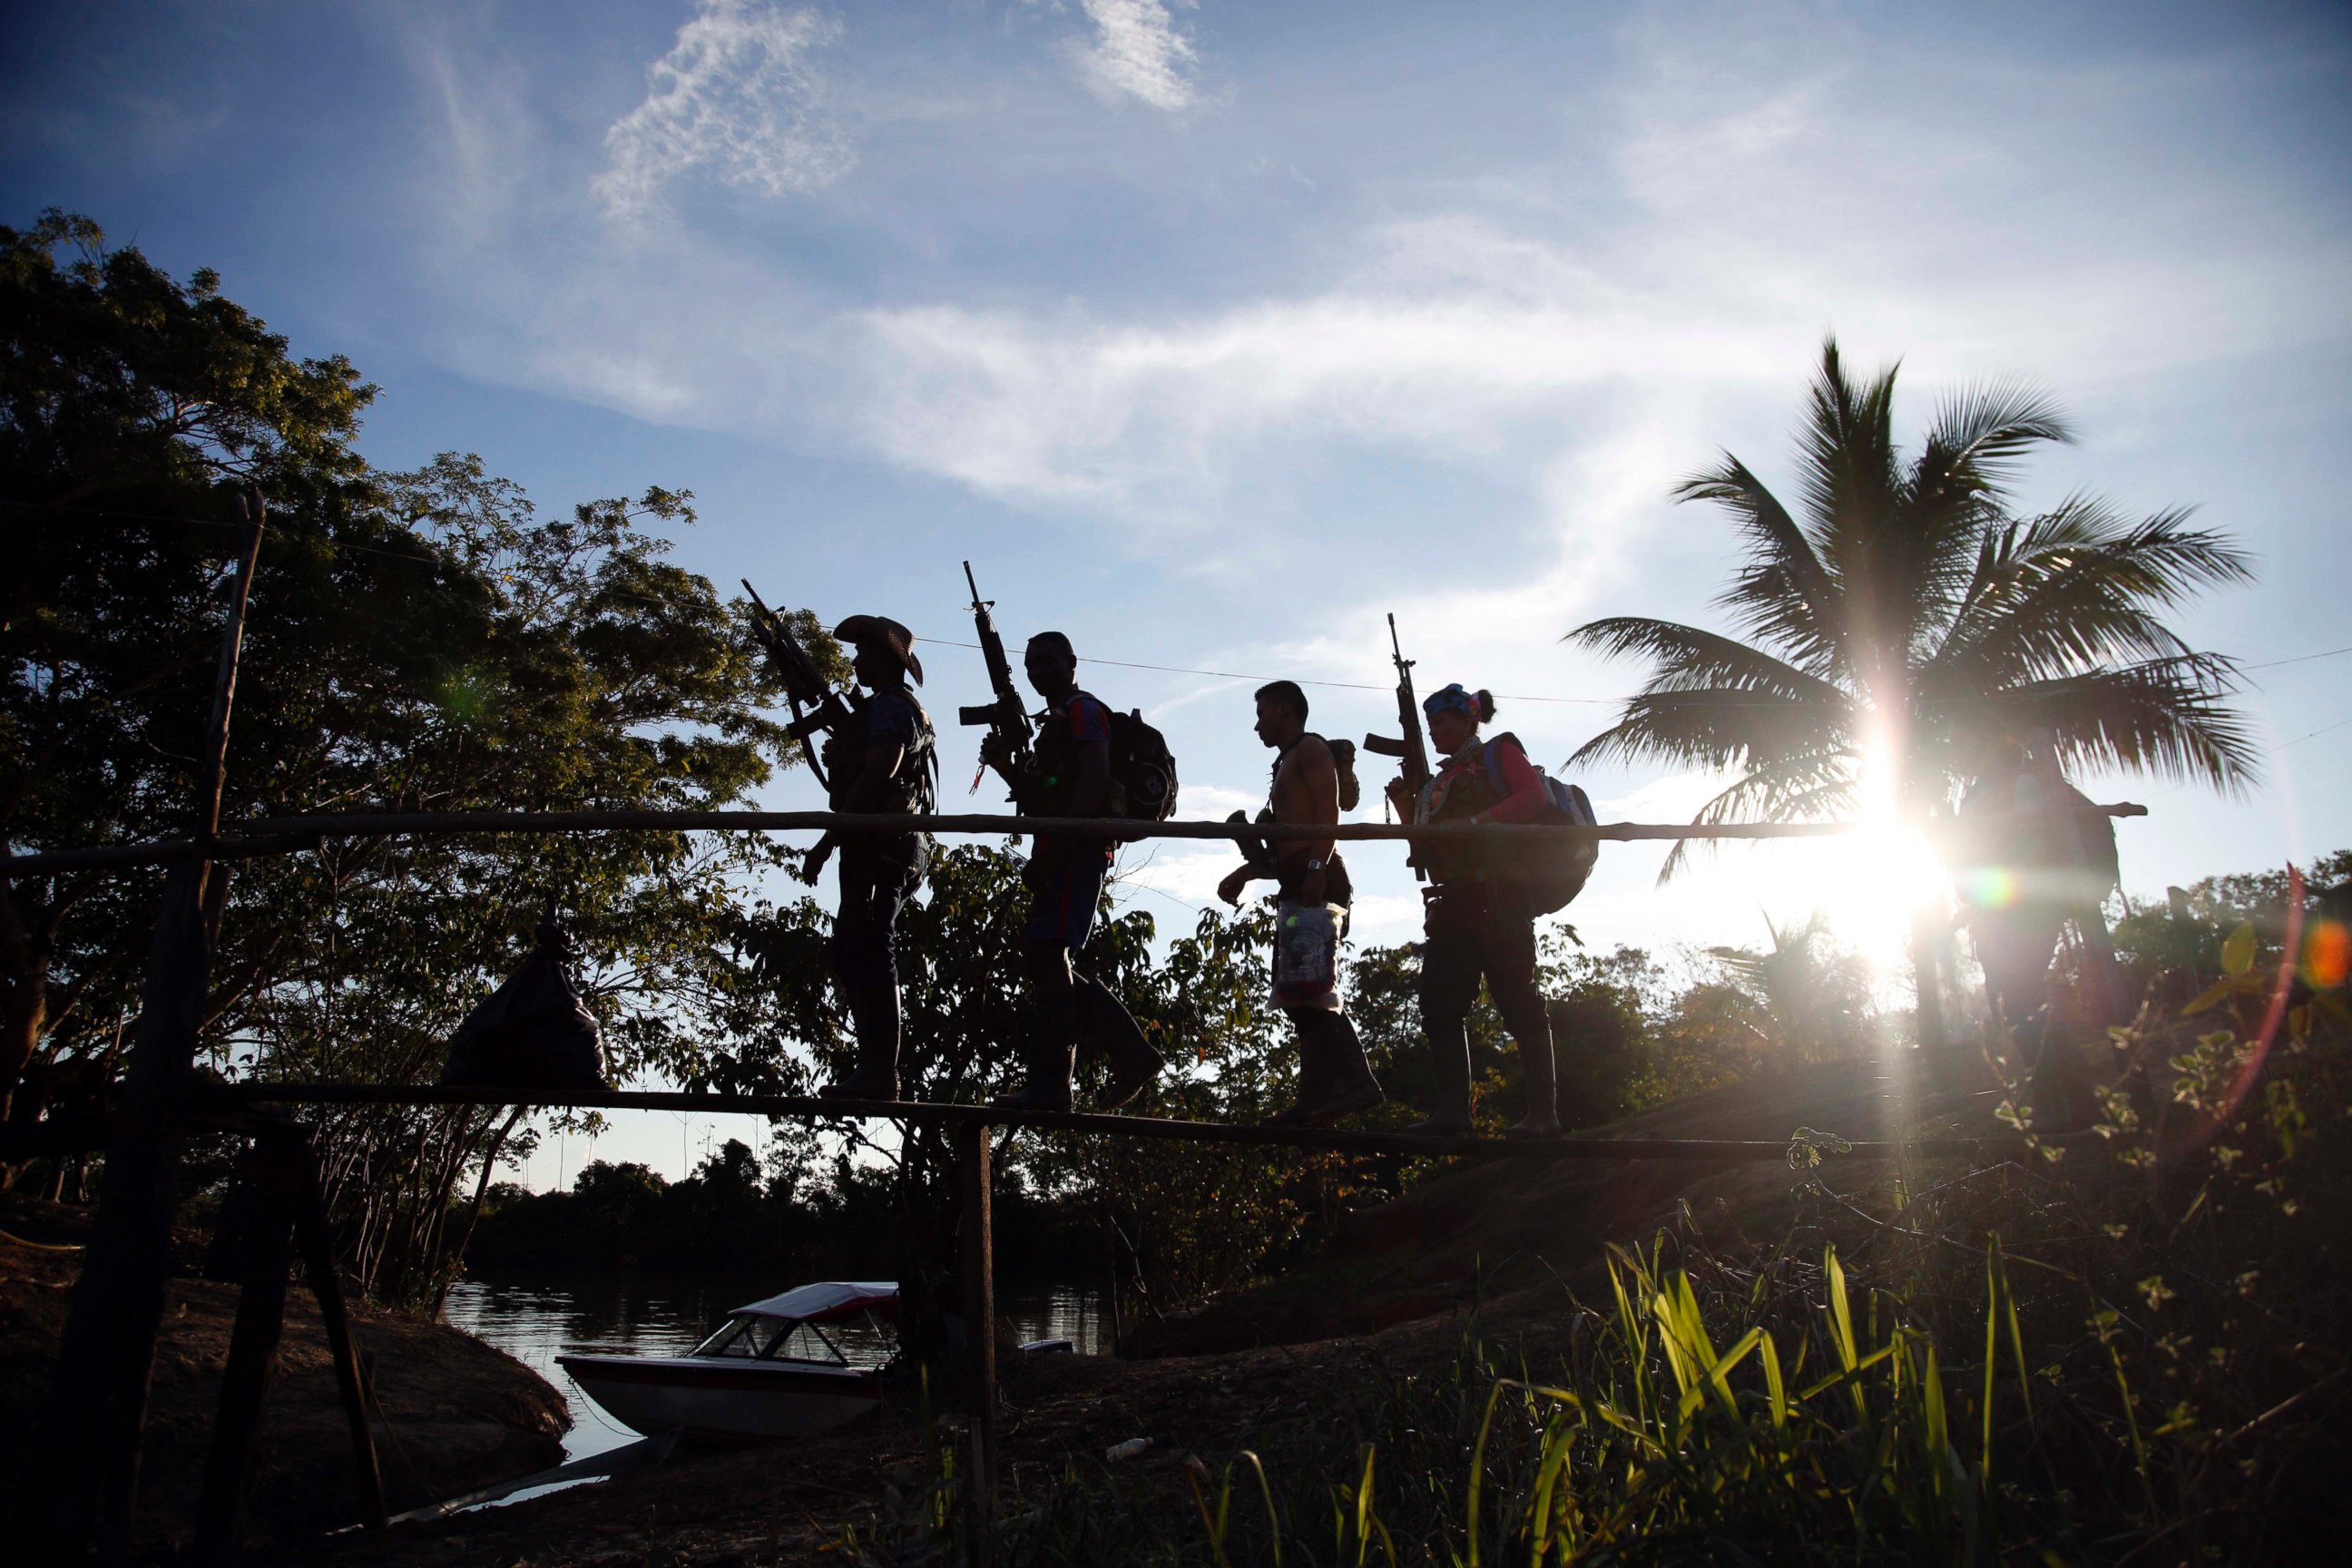 PHOTO: Rebels of the 48th Front of the Revolutionary Armed Forces of Colombia walk on a makeshift footbridge in the southern jungles of Putumayo, Colombia, Aug. 11, 2016.